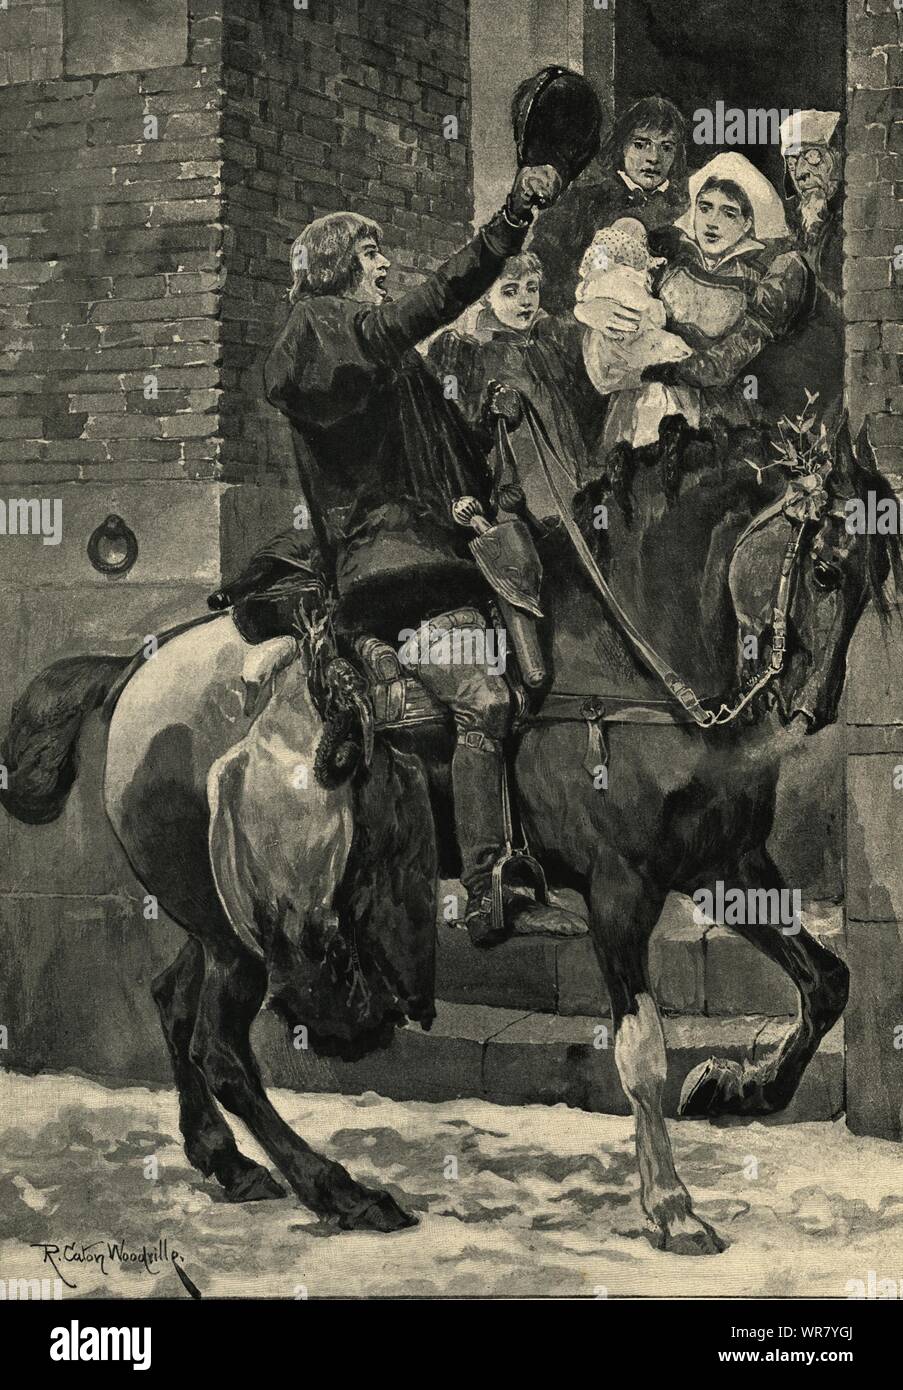 Christmas loot 'in days of old each baron bold received from far & near…' 1895 Stock Photo